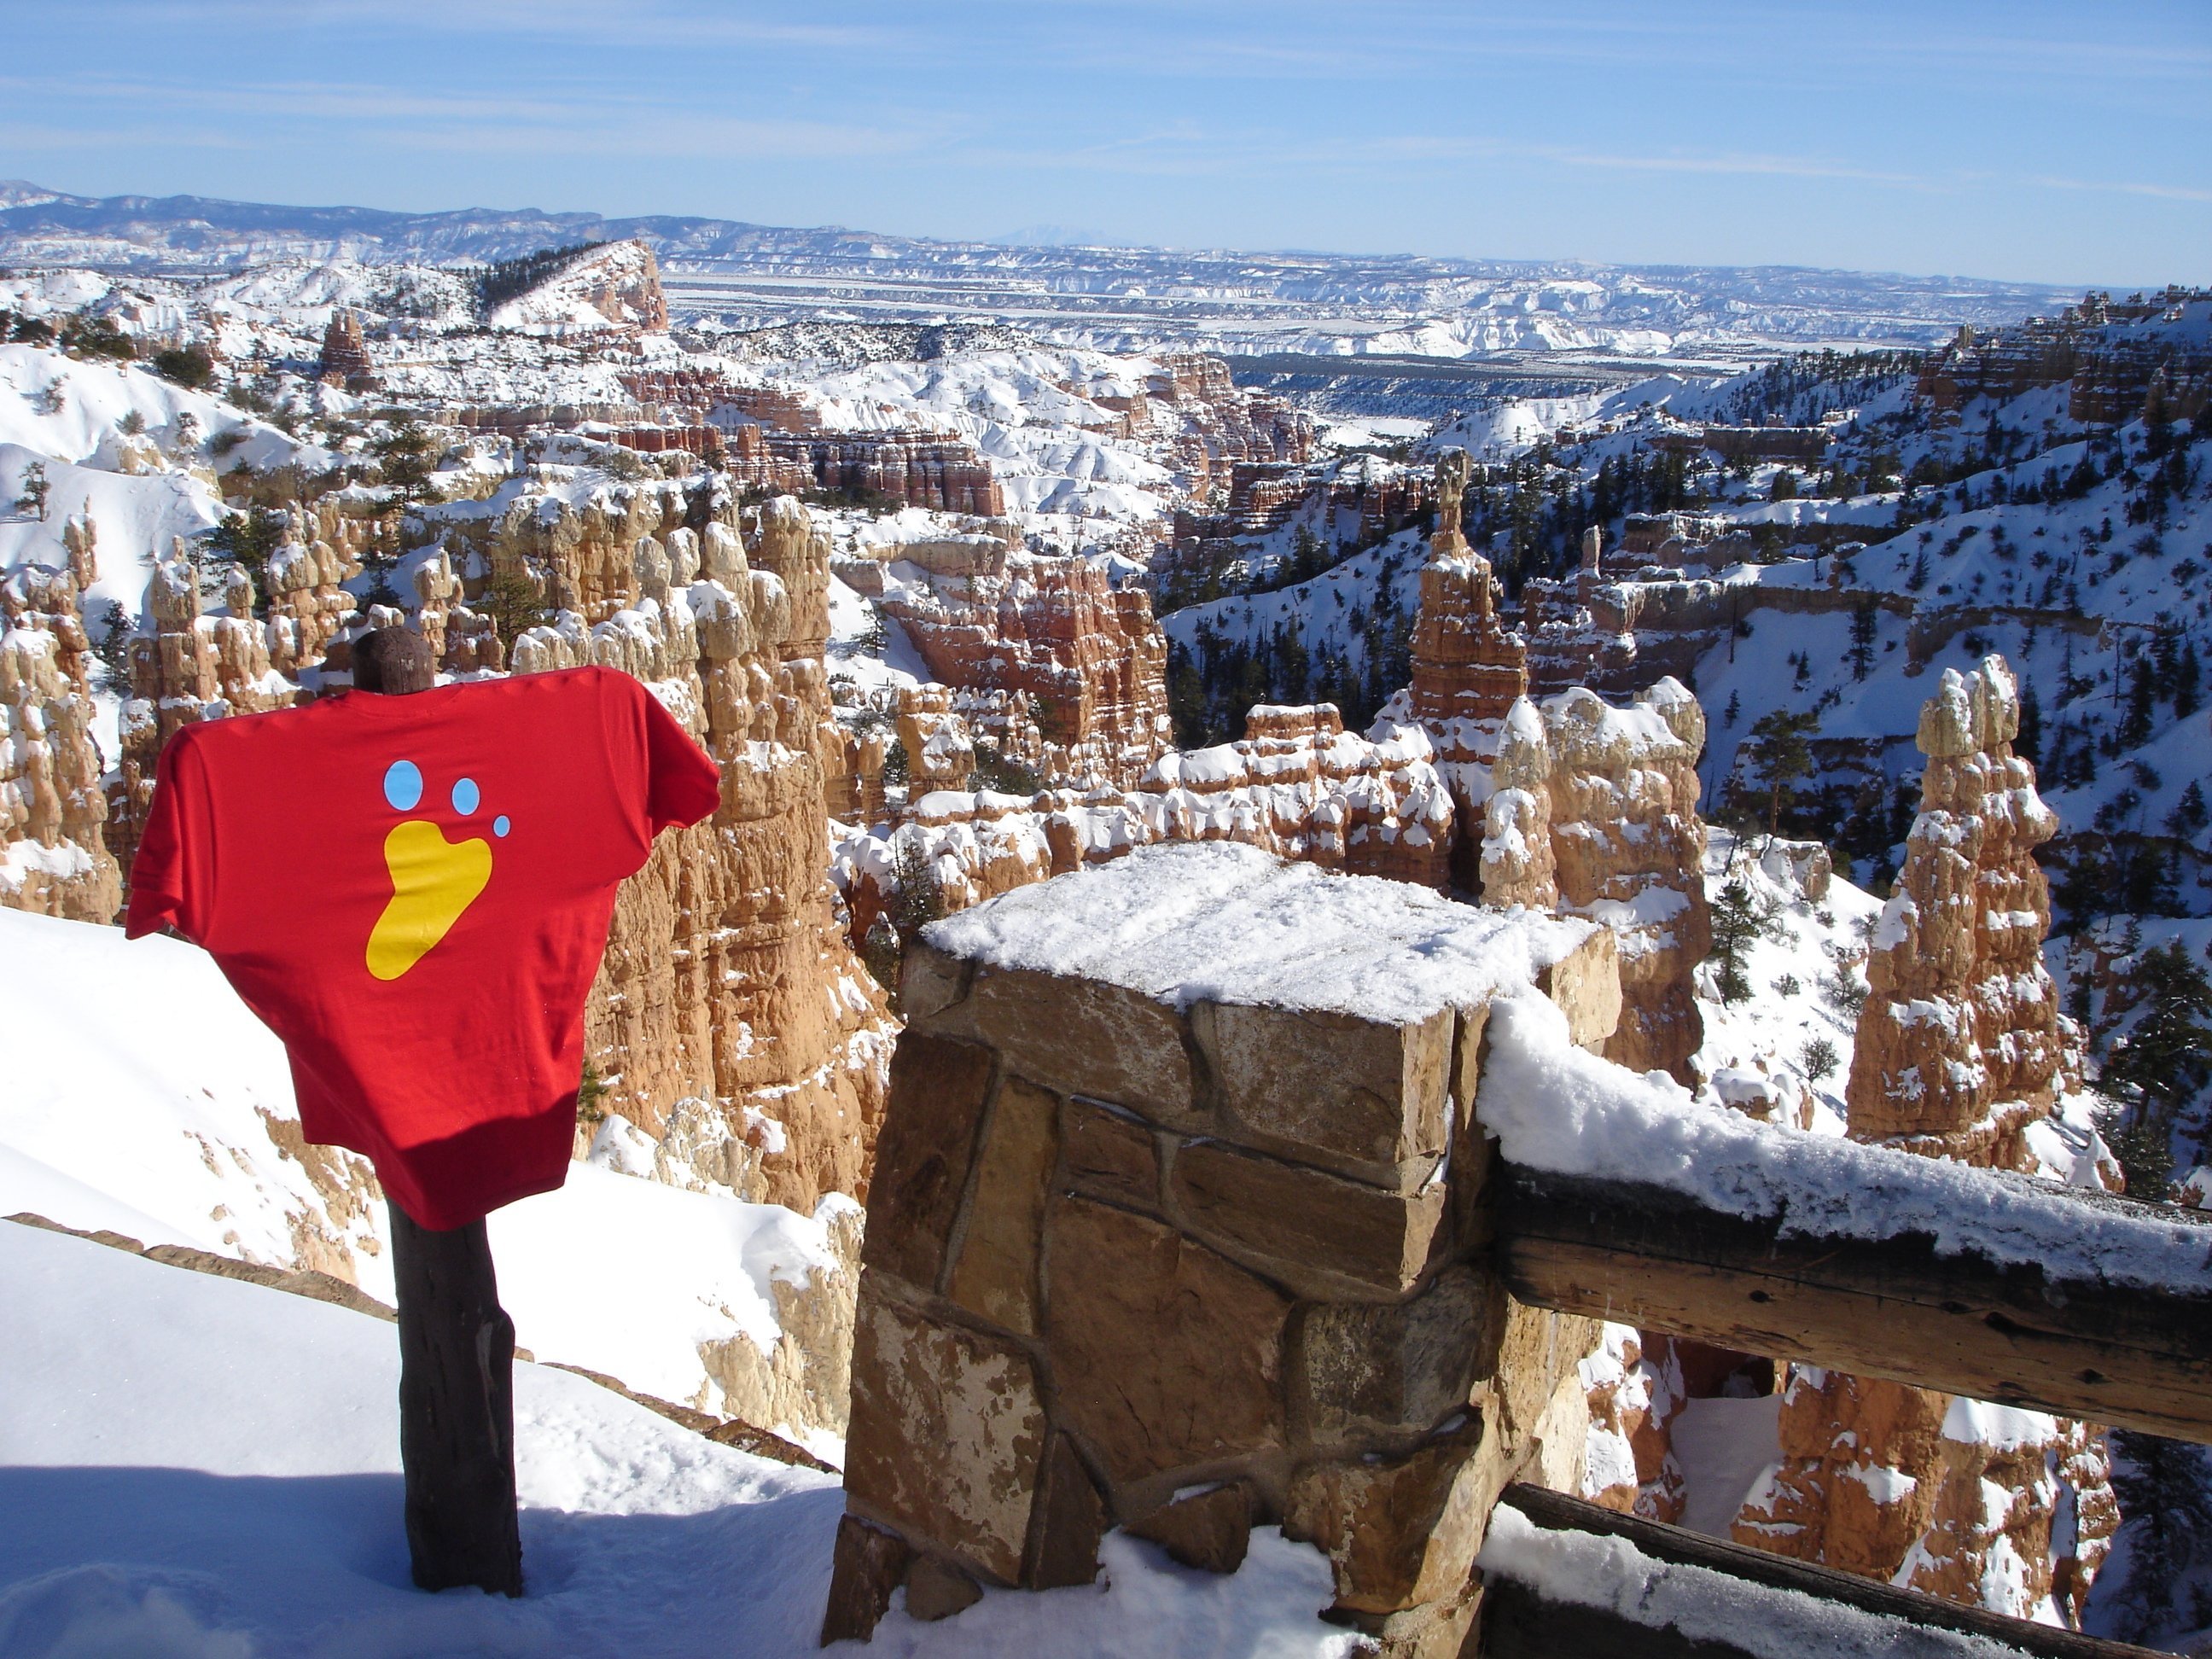 The Yeti in the world to discover the Bryce Canyon